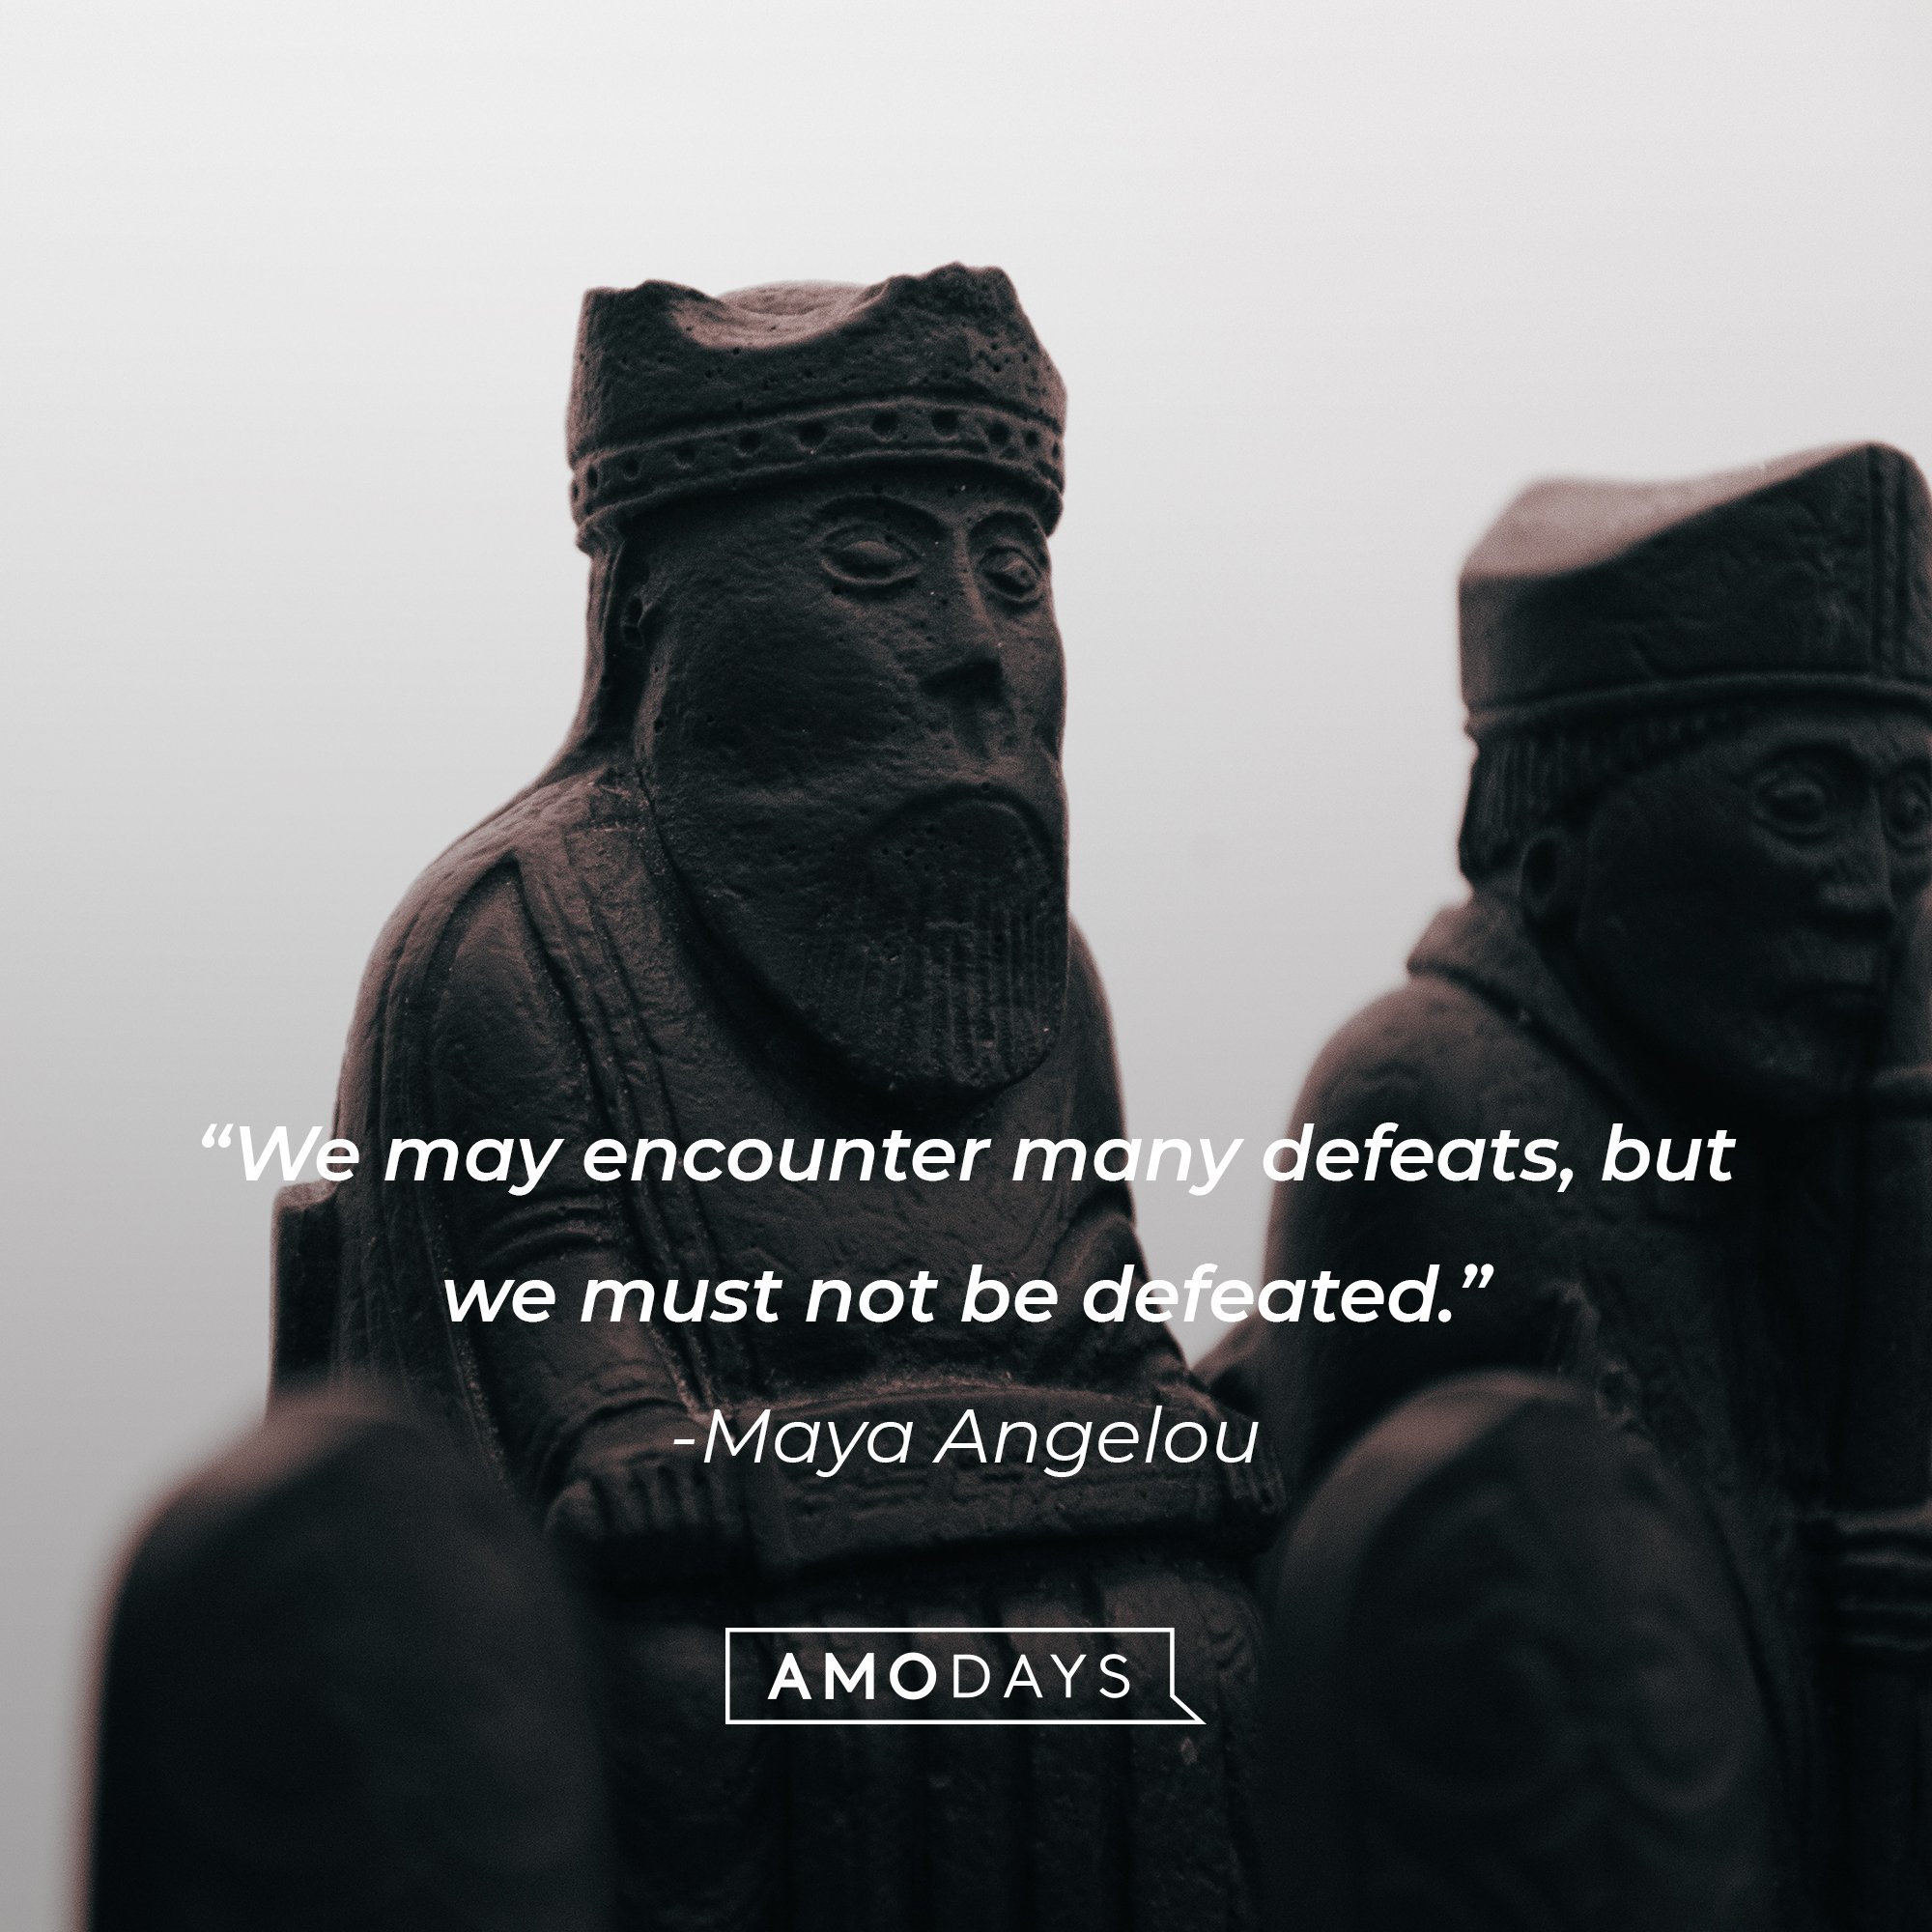 Maya Angelou's quote:  "We may encounter many defeats, but we must not be defeated." | Image: AmoDays